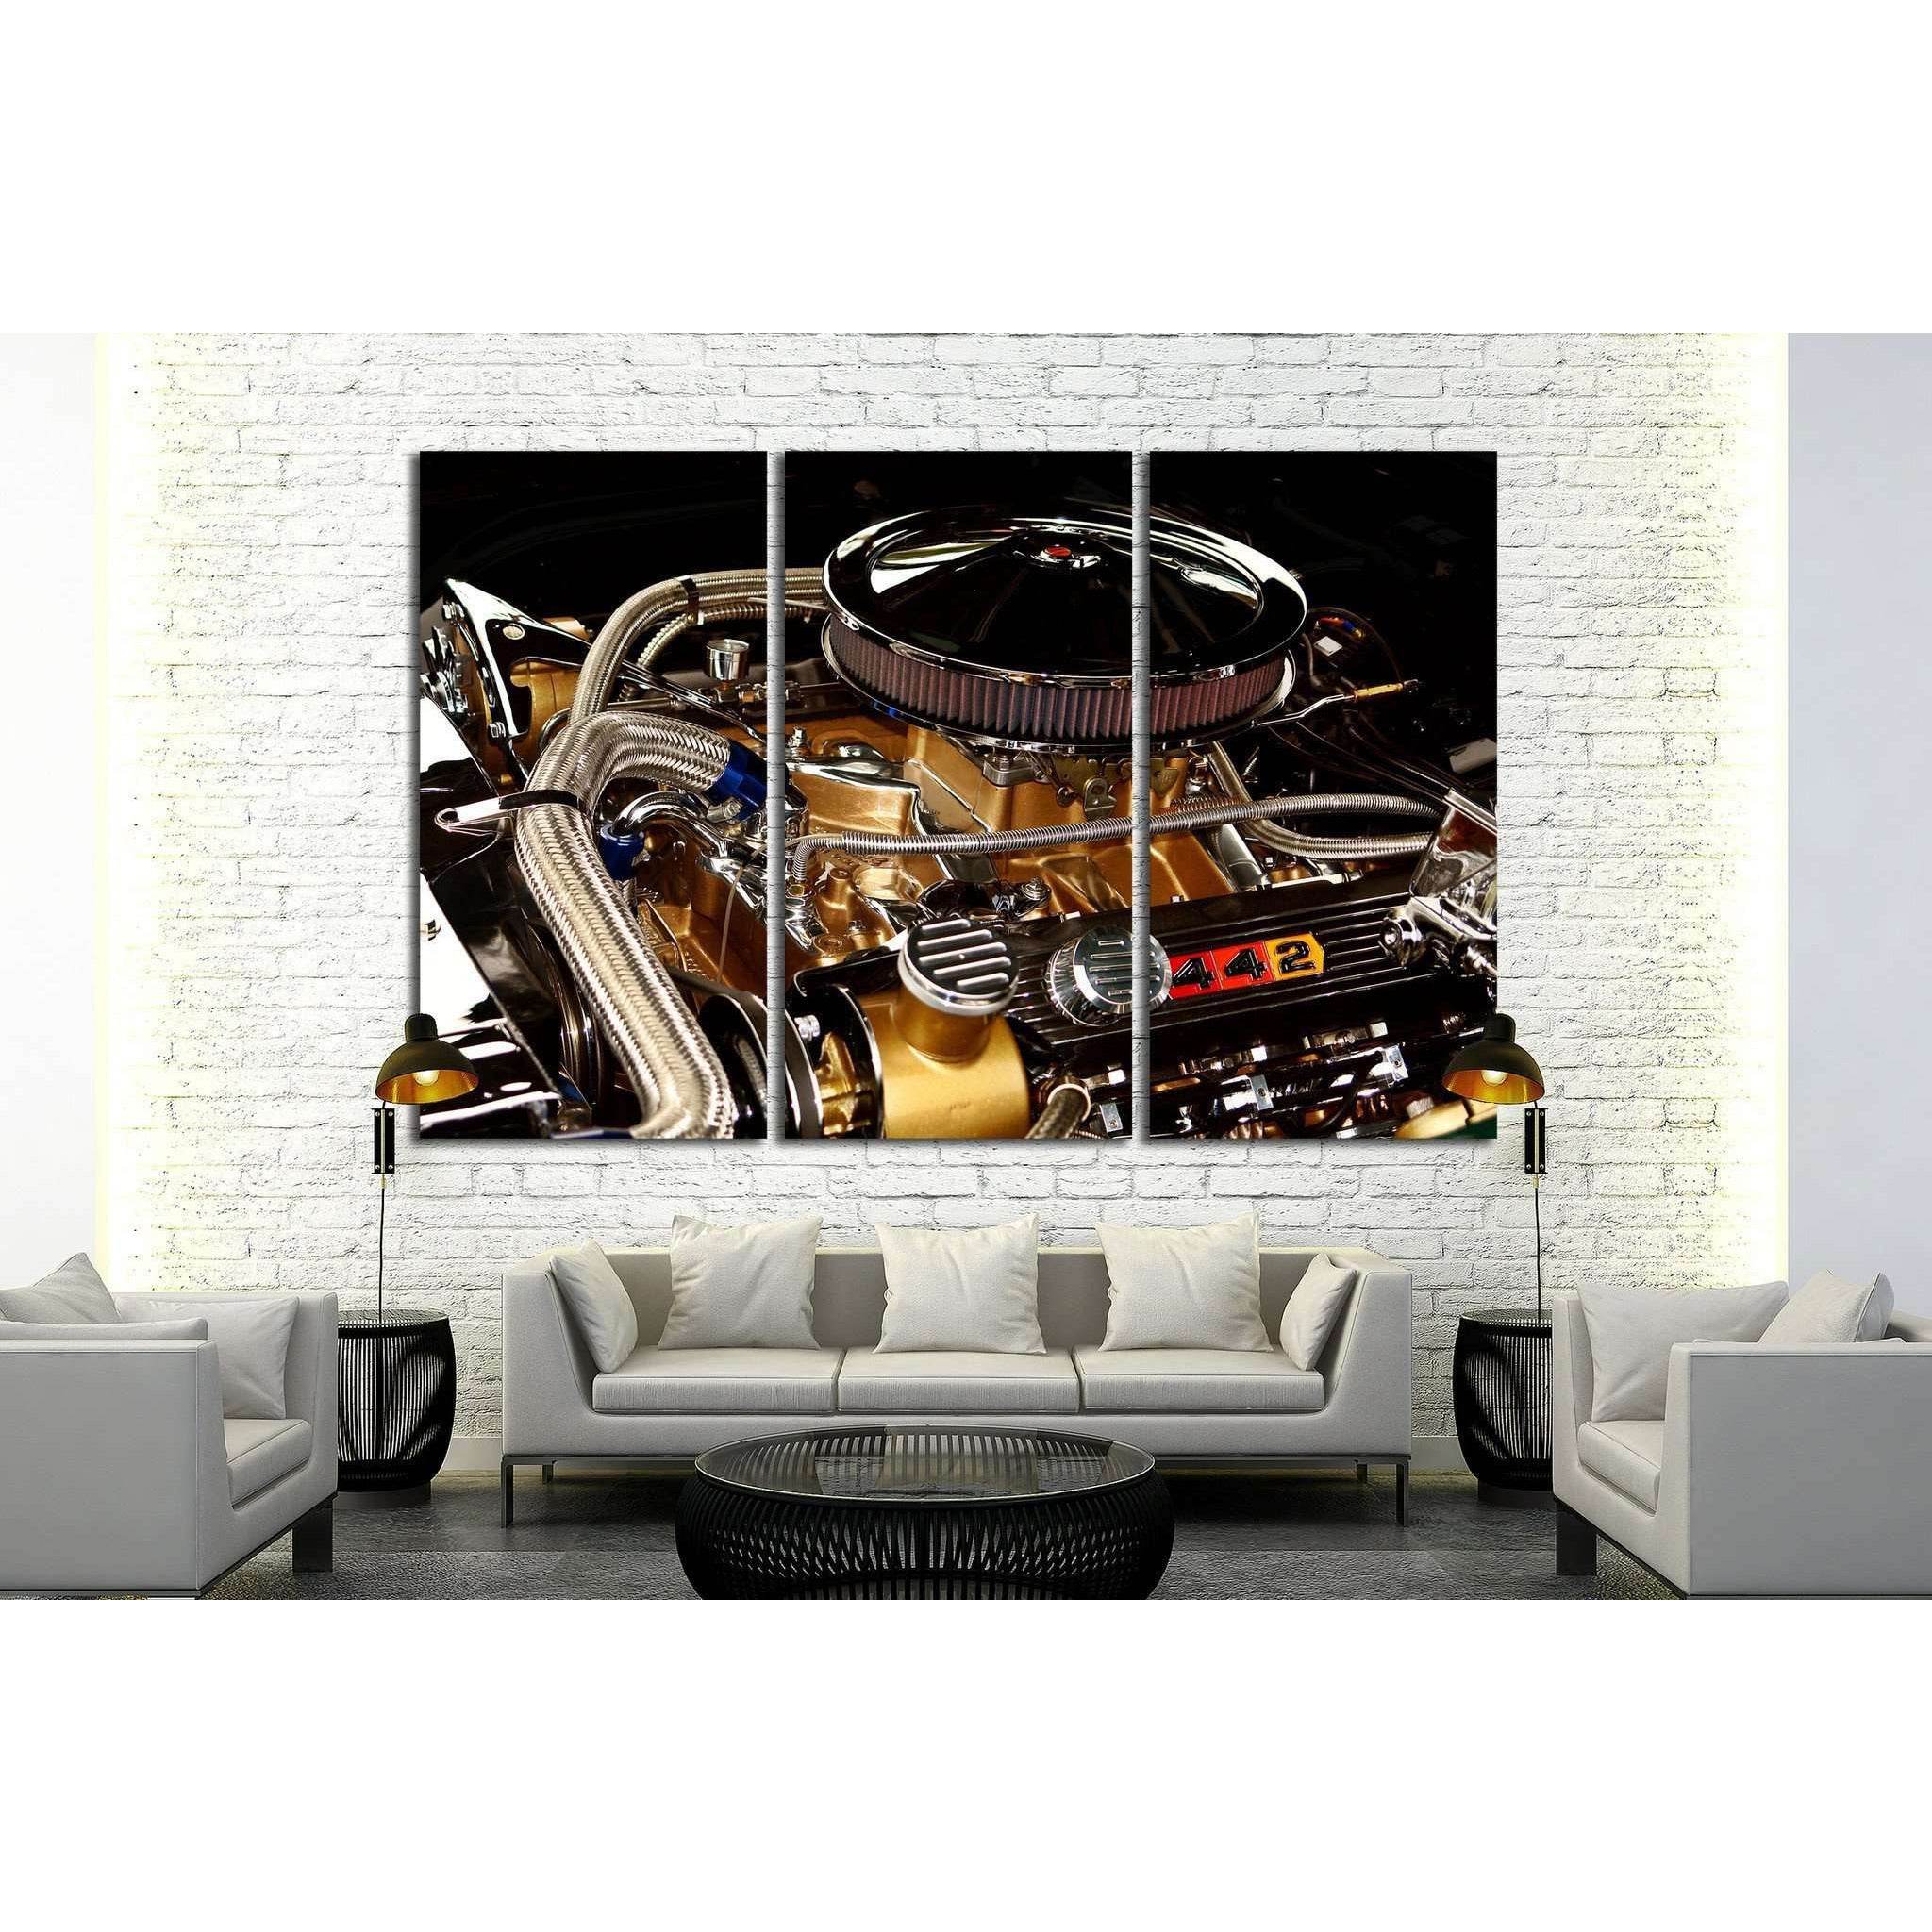 Race Car Engine №517 Ready to Hang Canvas Print